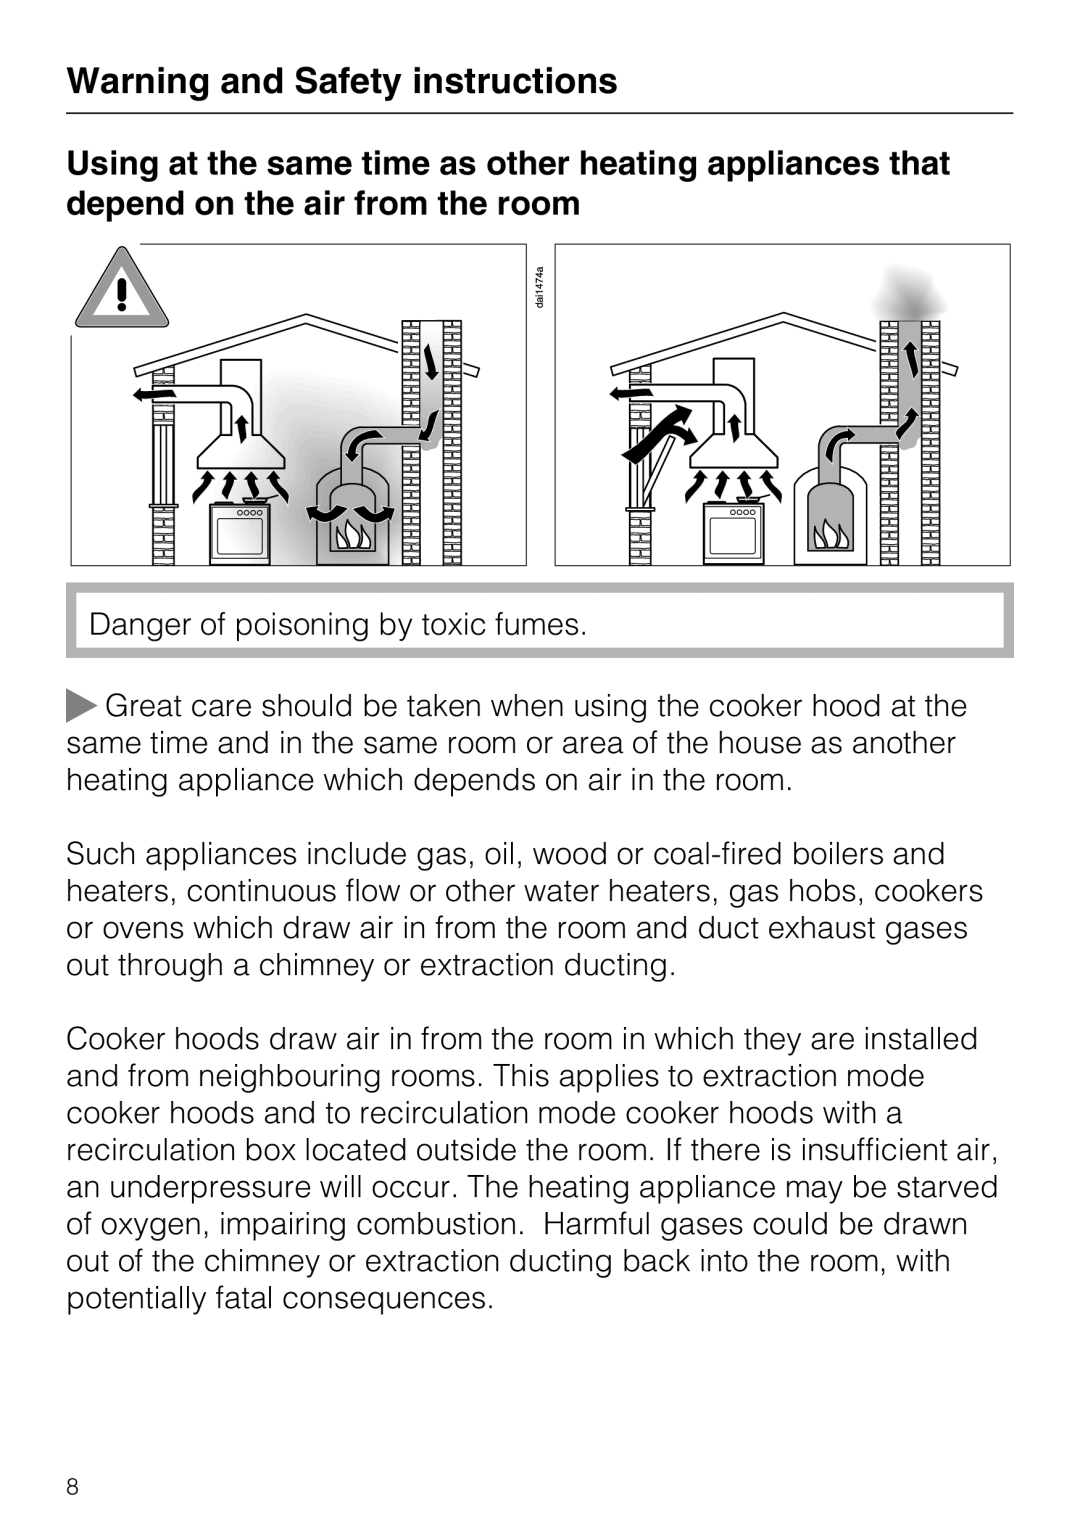 Miele 09 730 840 installation instructions Warning and Safety instructions, Danger of poisoning by toxic fumes 